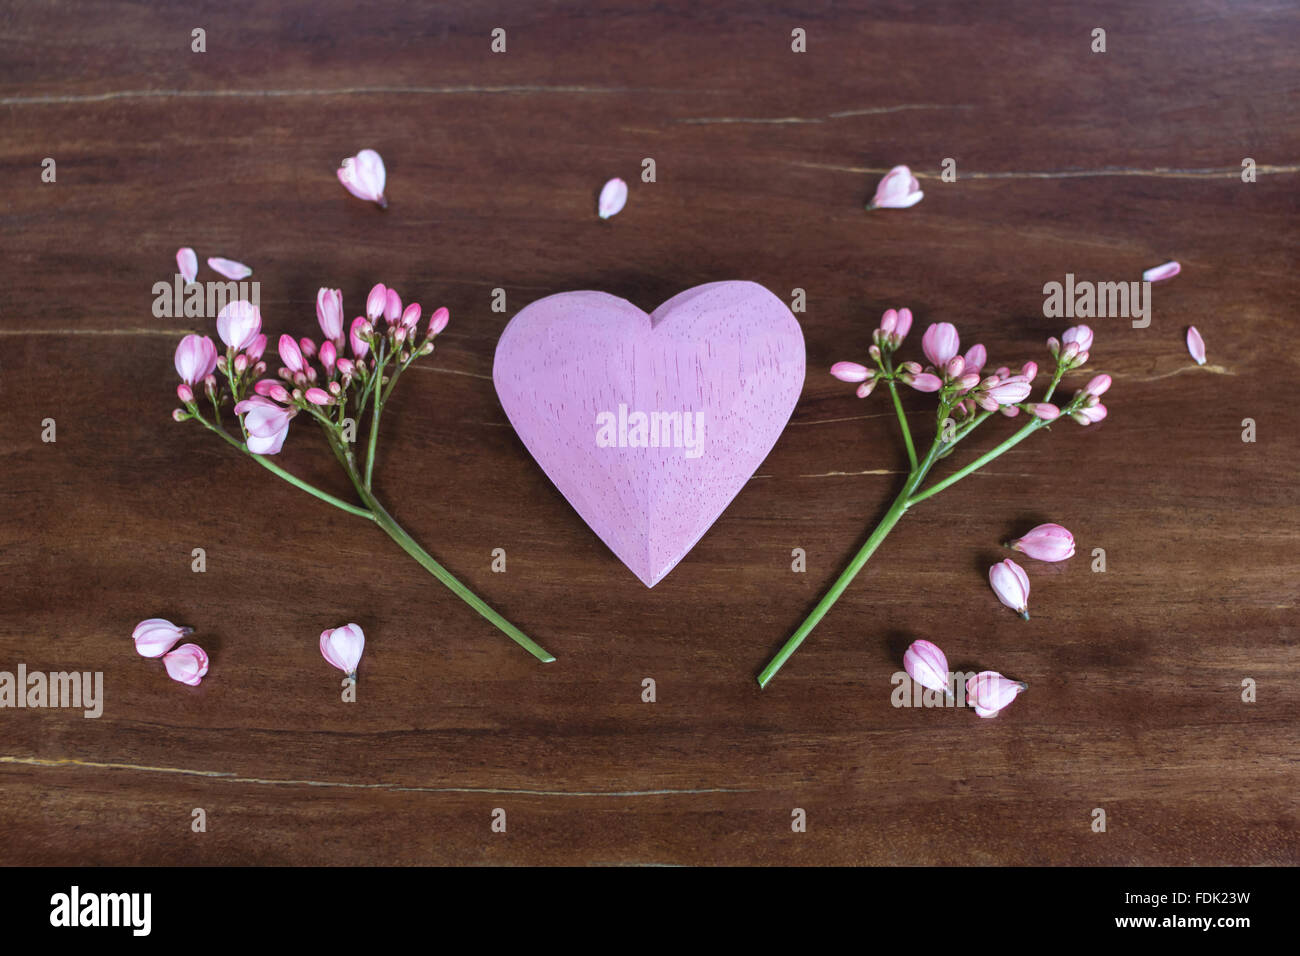 Pink wooden heart and flowers on a table Stock Photo